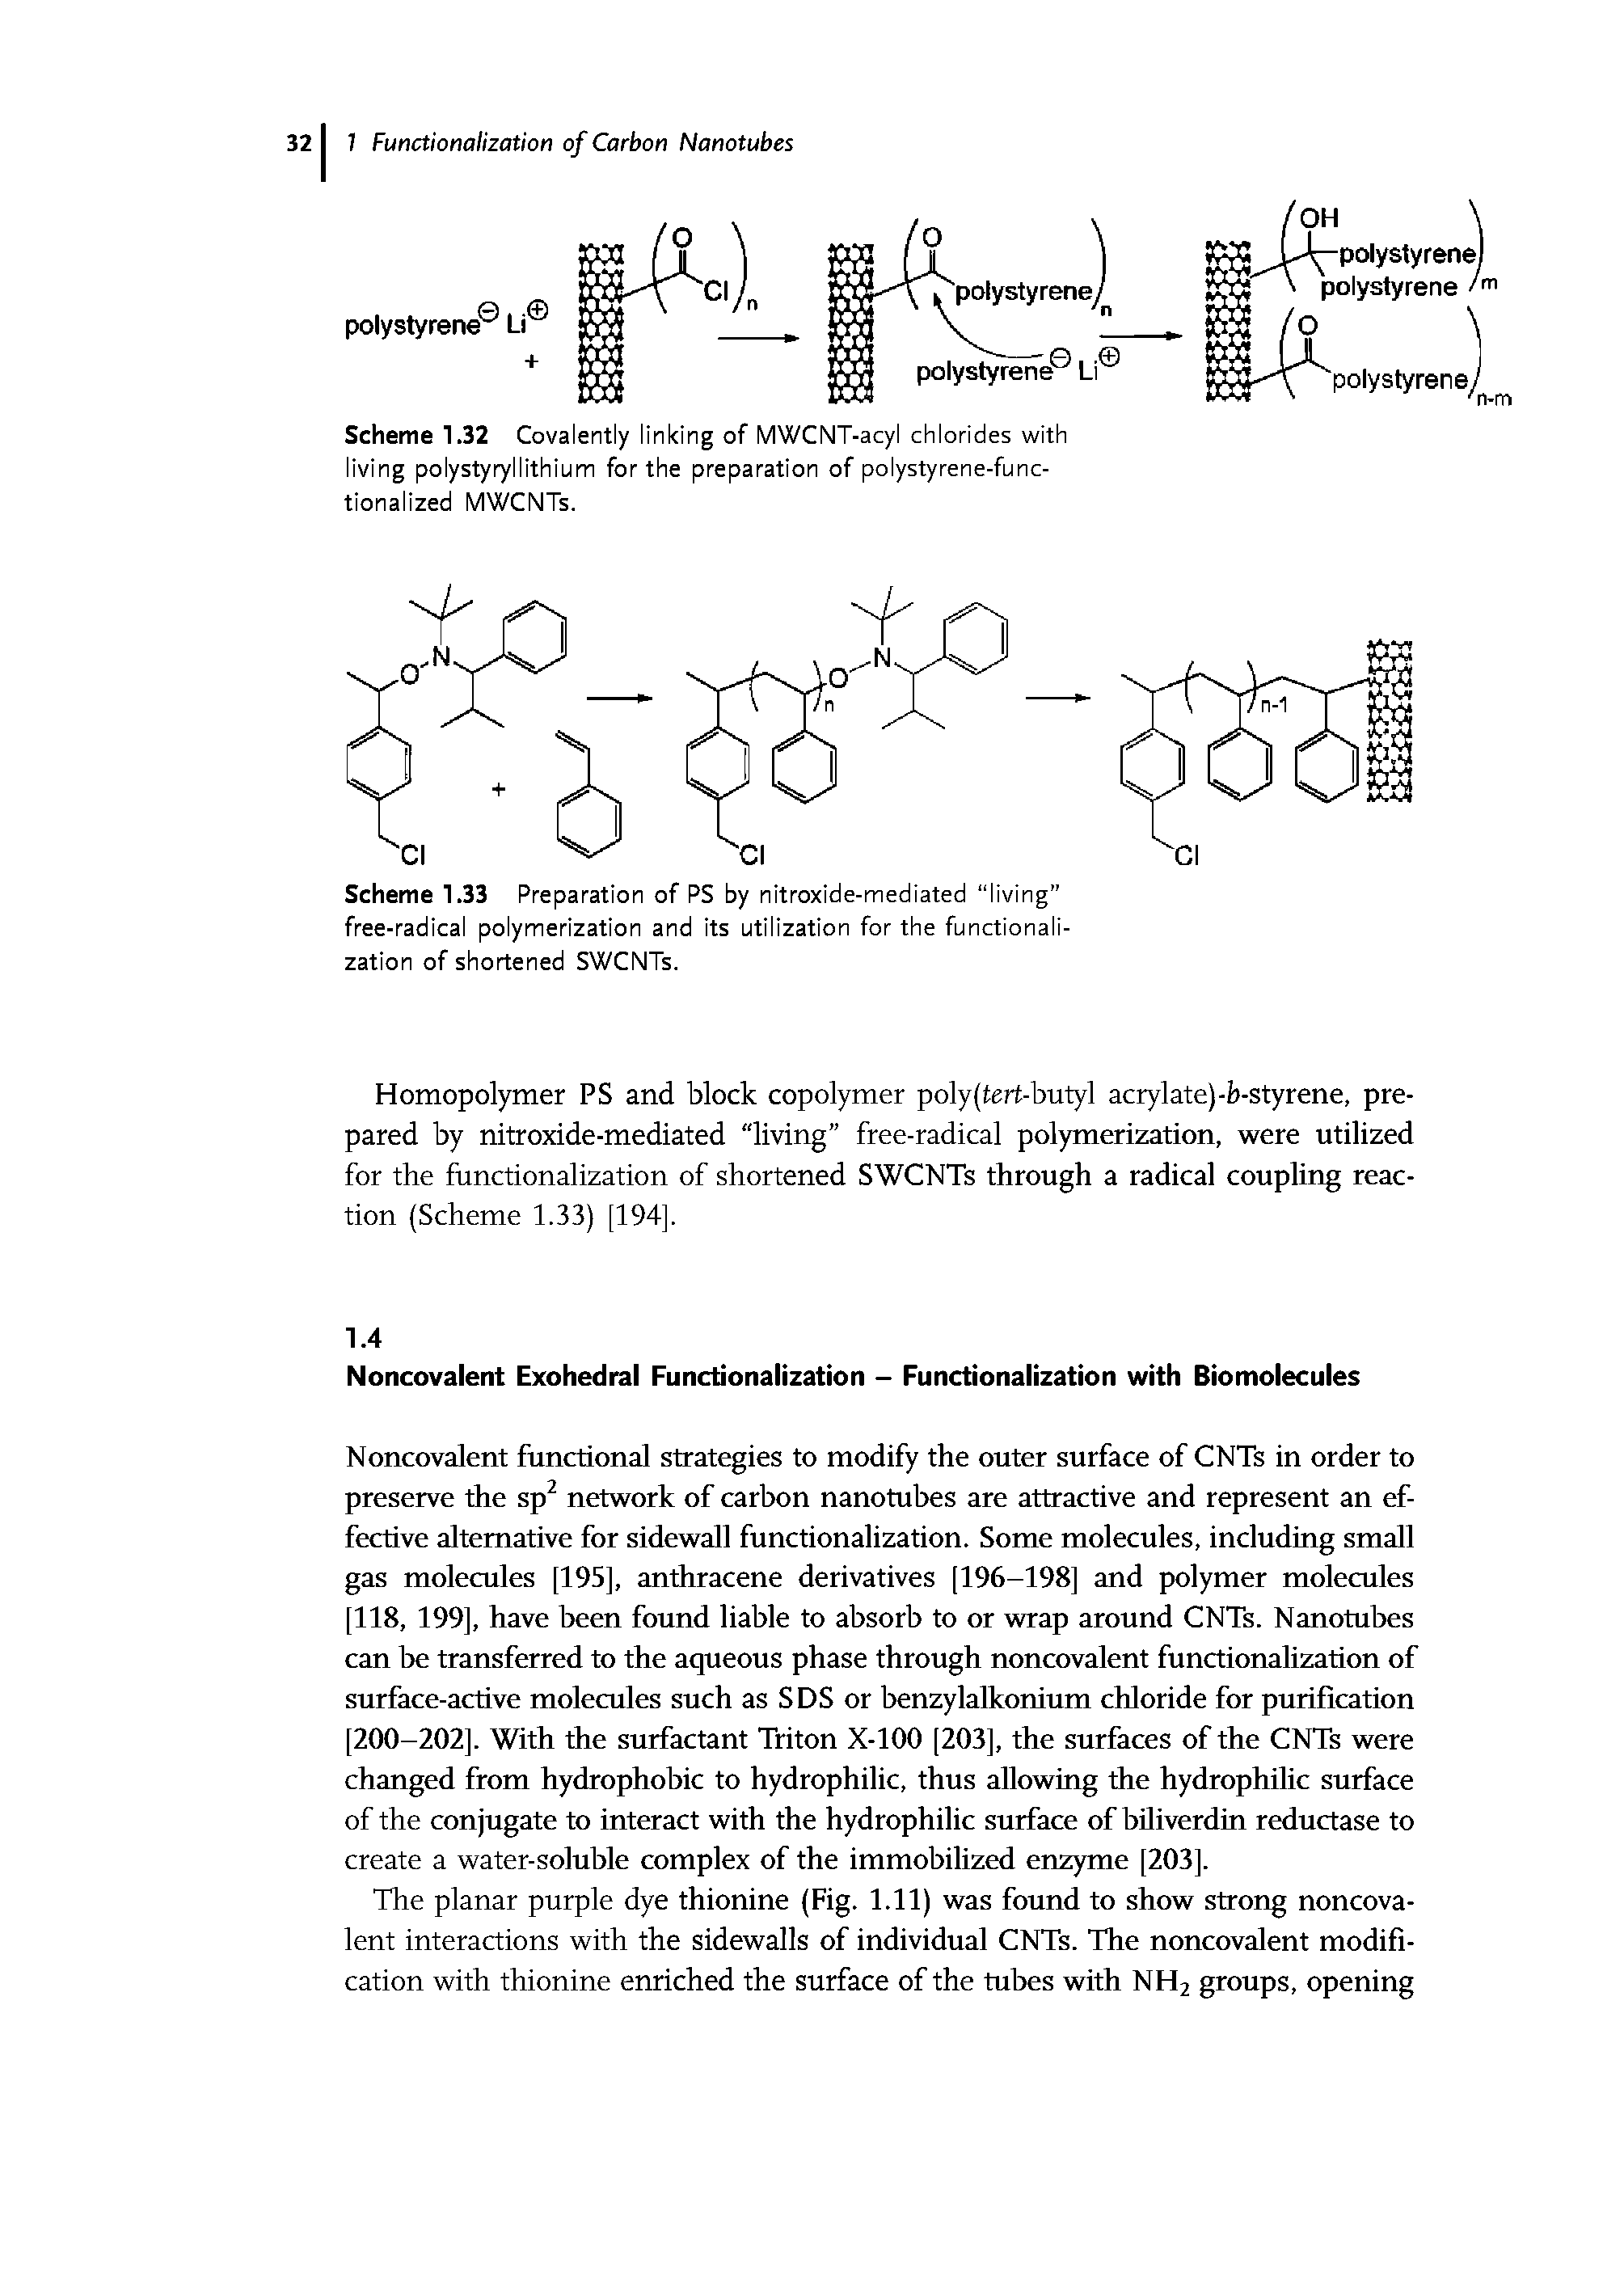 Scheme 1.32 Covalently linking of MWCNT-acyl chlorides with living polystyryllithium for the preparation of polystyrene-functionalized MWCNTs.